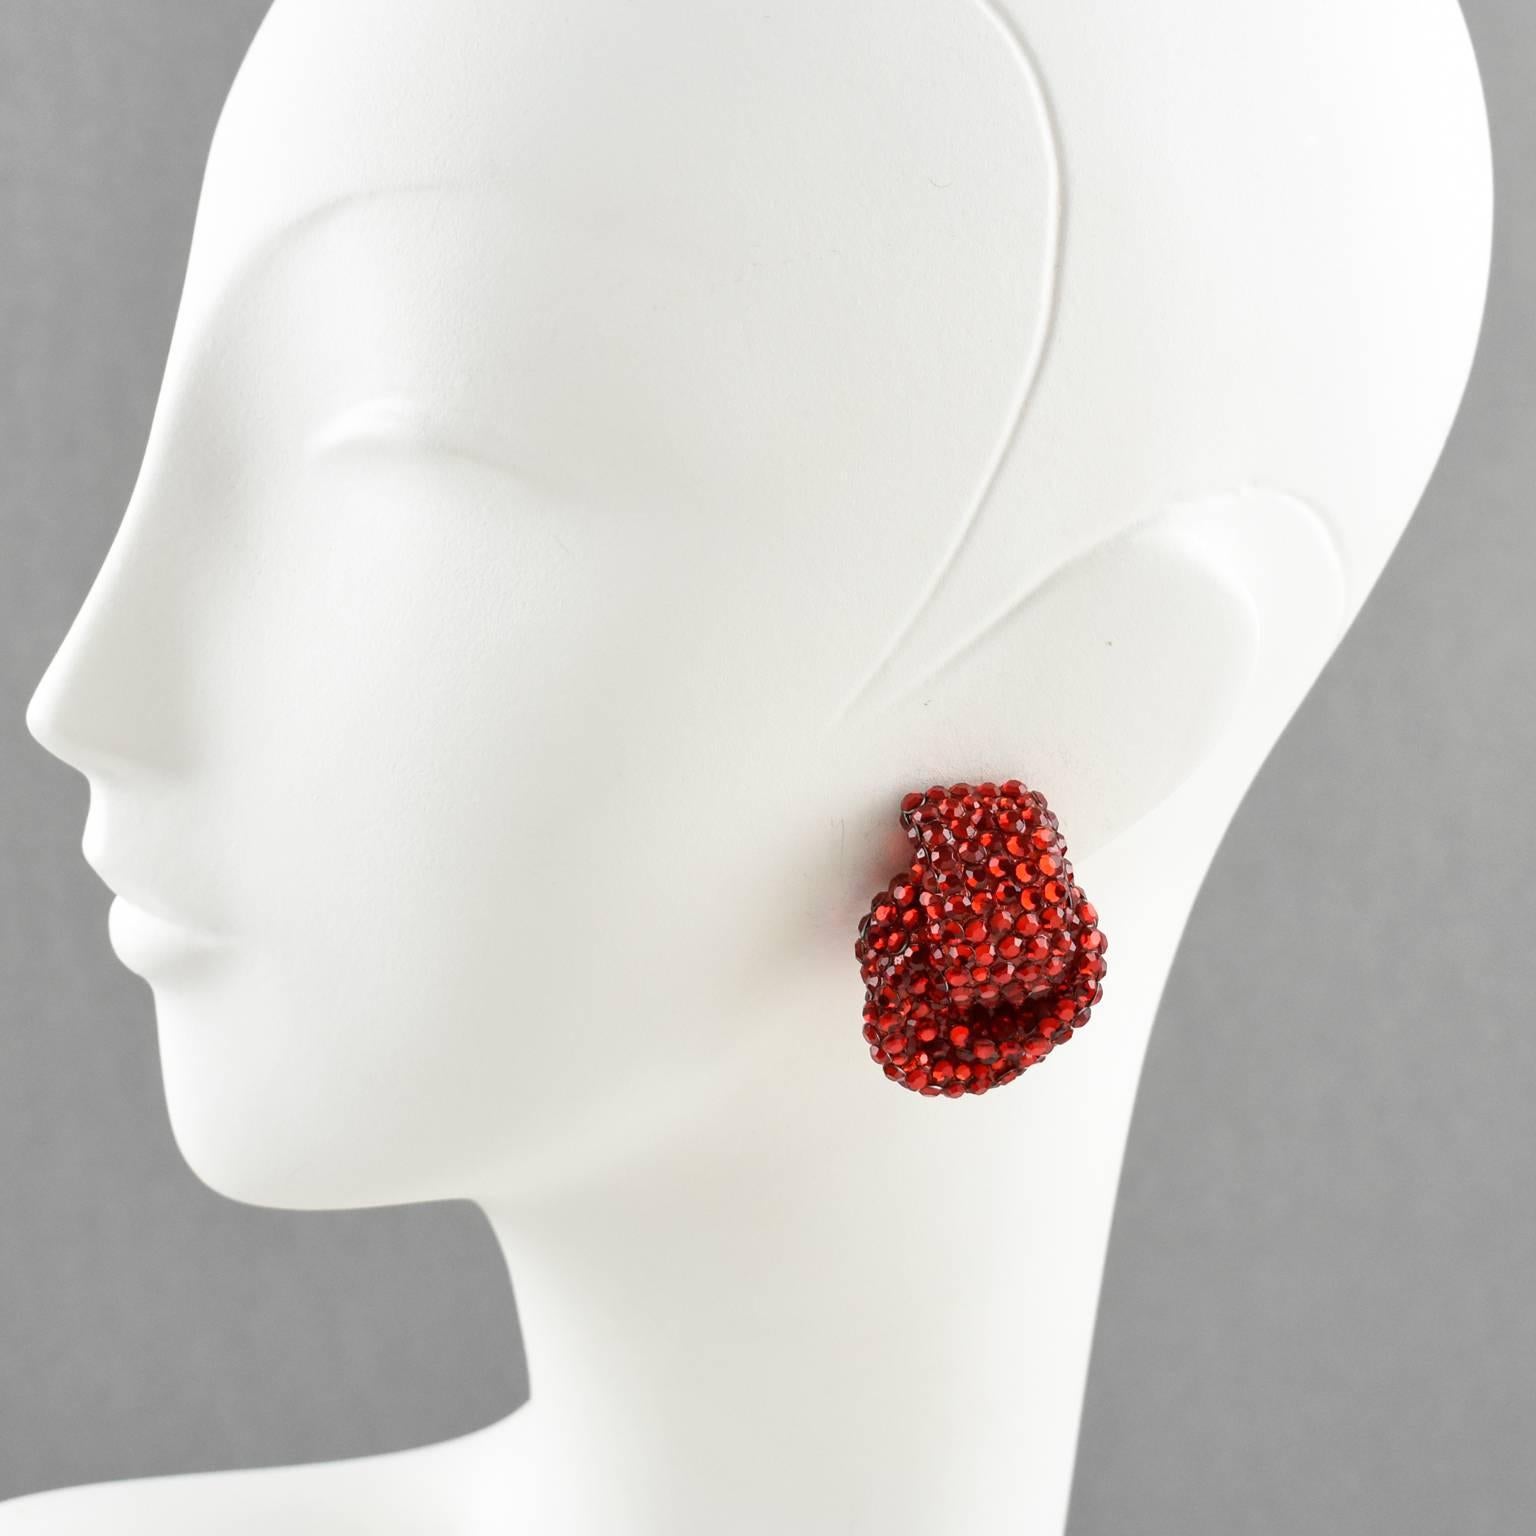 Classic statement clip-on earrings designed by Richard Kerr in the 1980s. They are made up of his signature pave rhinestones. Featuring dimensional knot shape all covered with colorful crystal rhinestones on red resin background frame. Vivid ruby